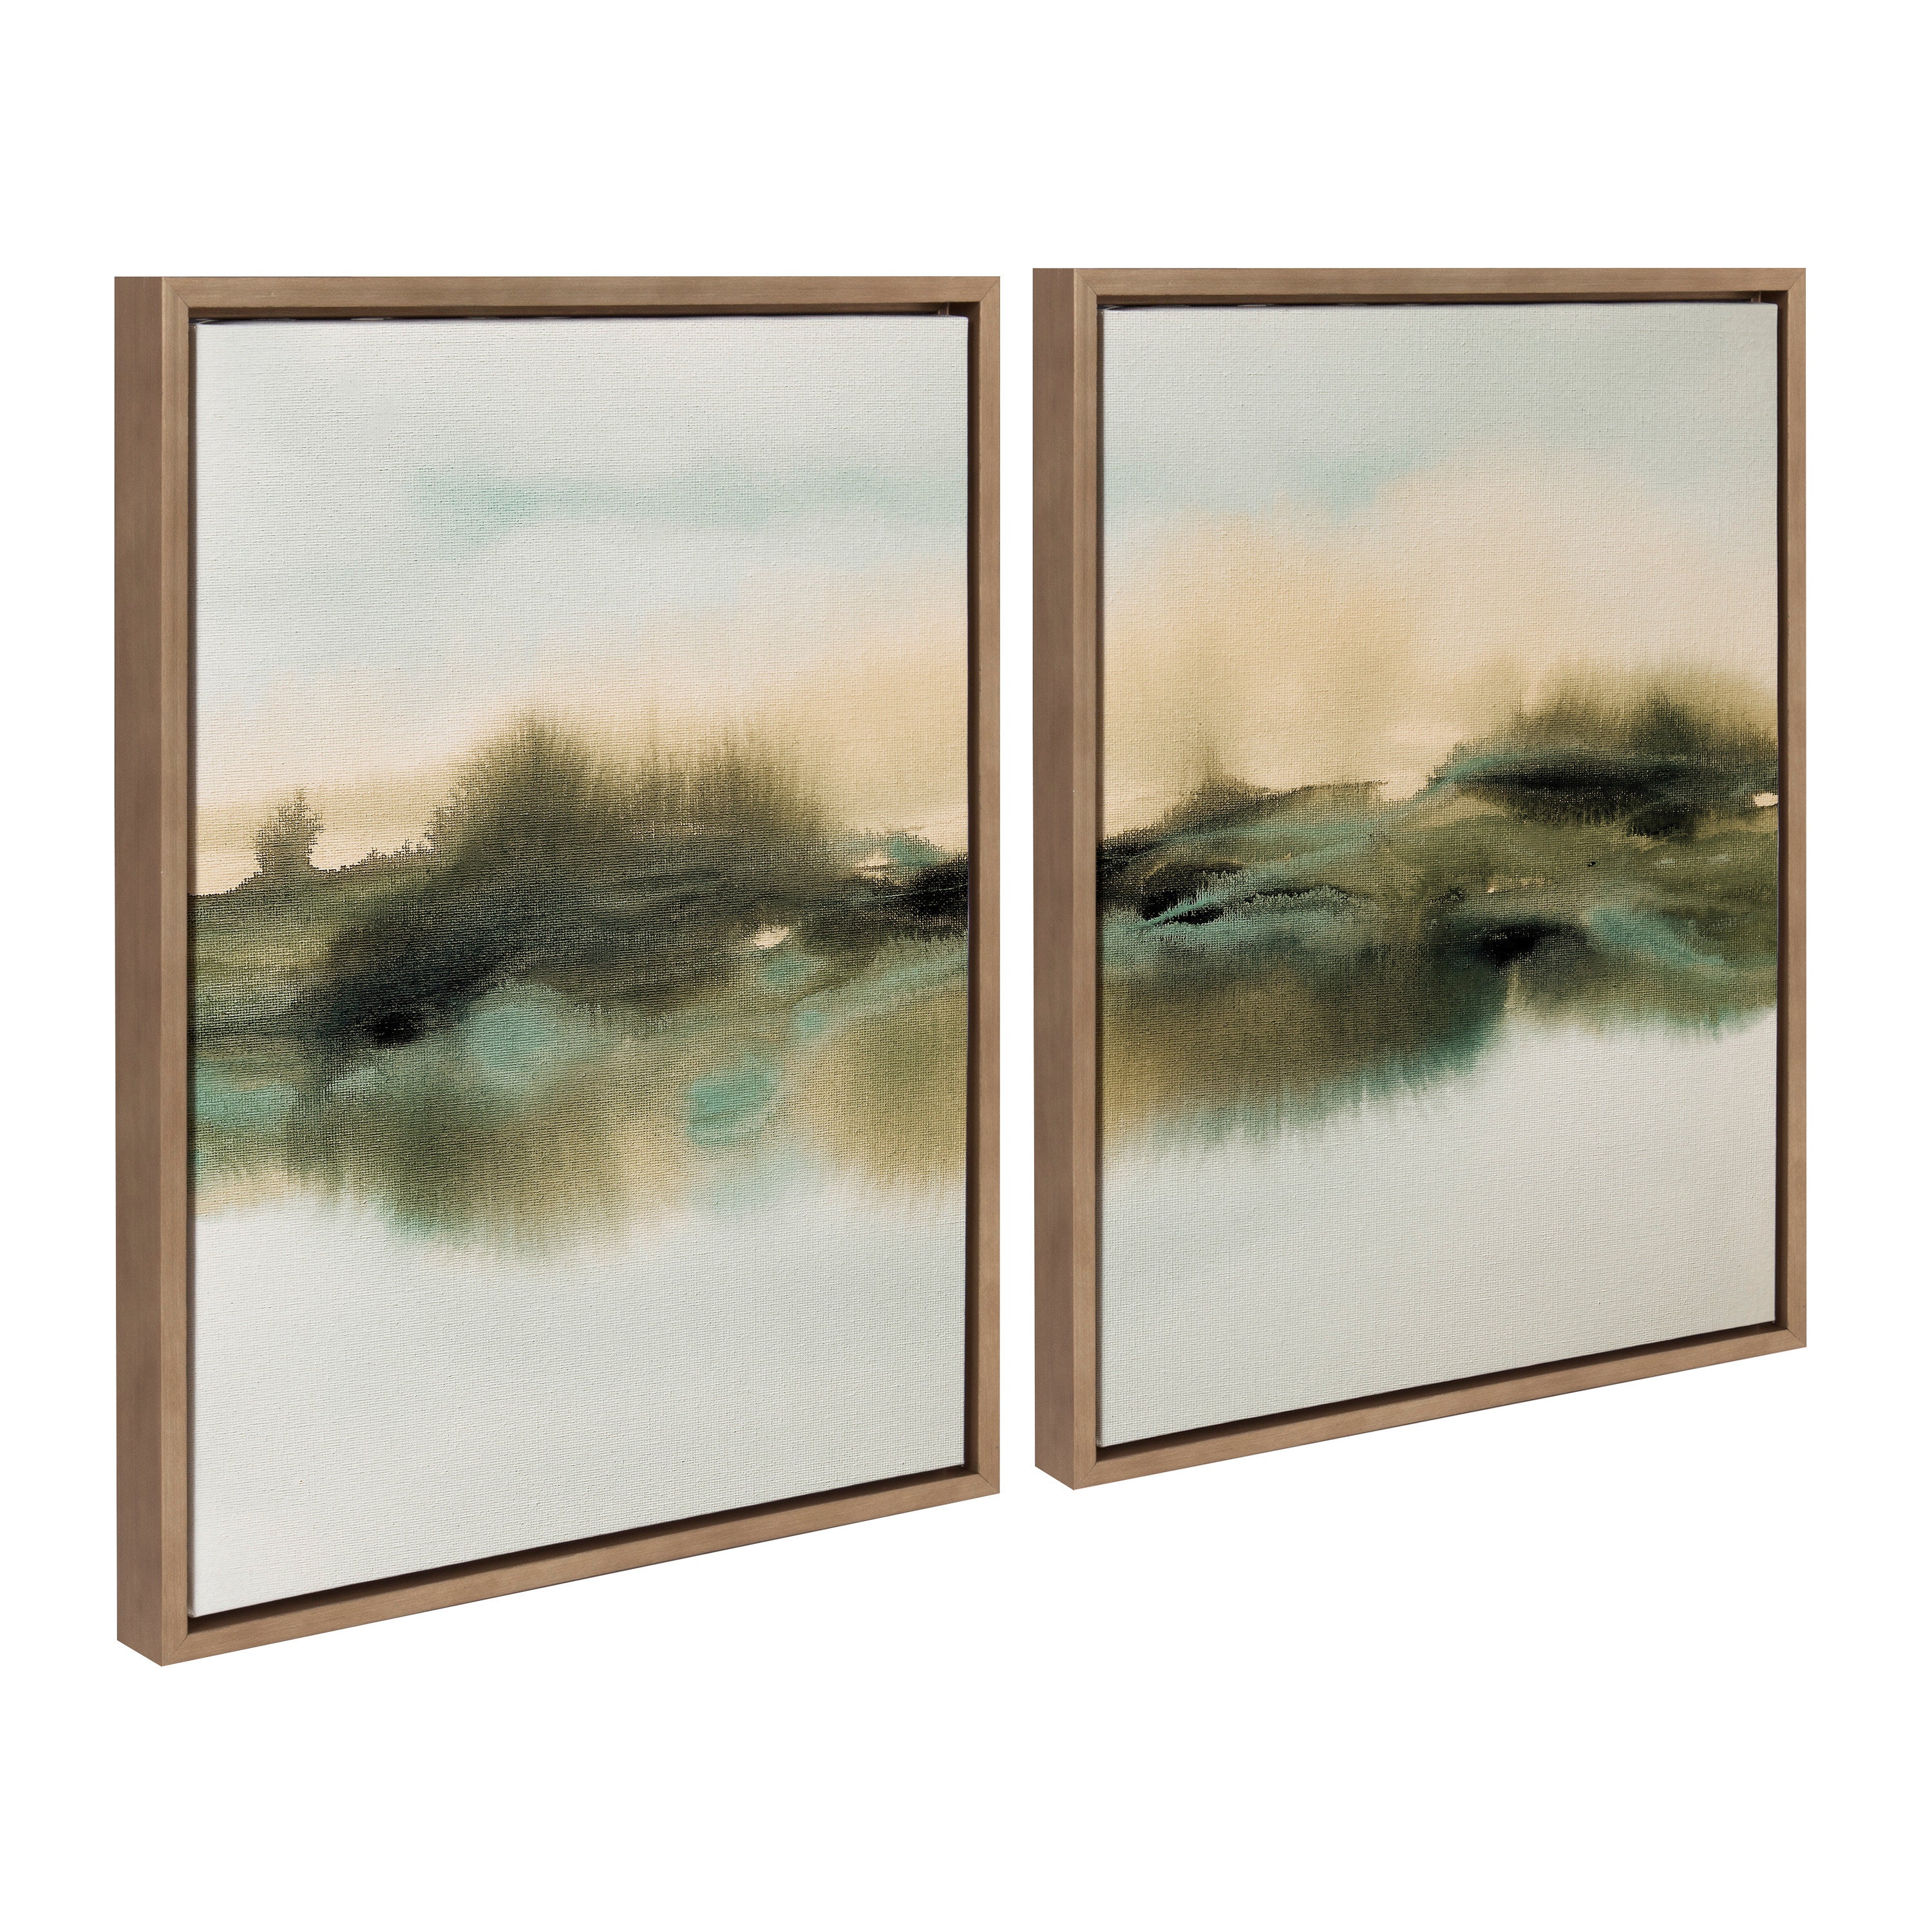 Sylvie Tranquil Meadows I and II Framed Canvas Art Set by Amy Lighthall